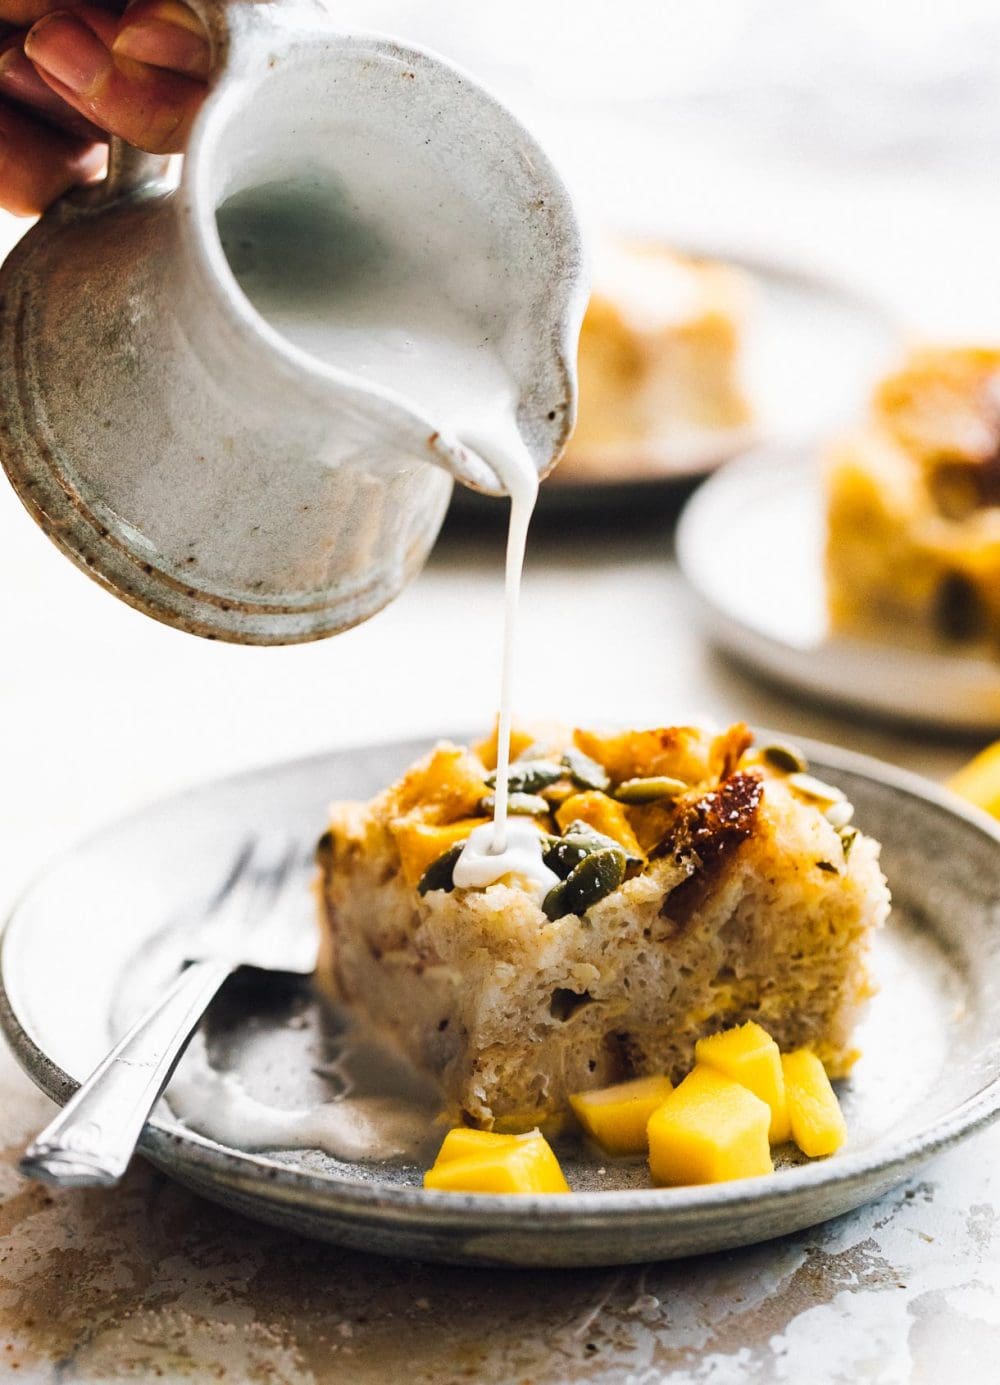 pouring vanilla cream onto bread pudding, with mangos on the side of plate